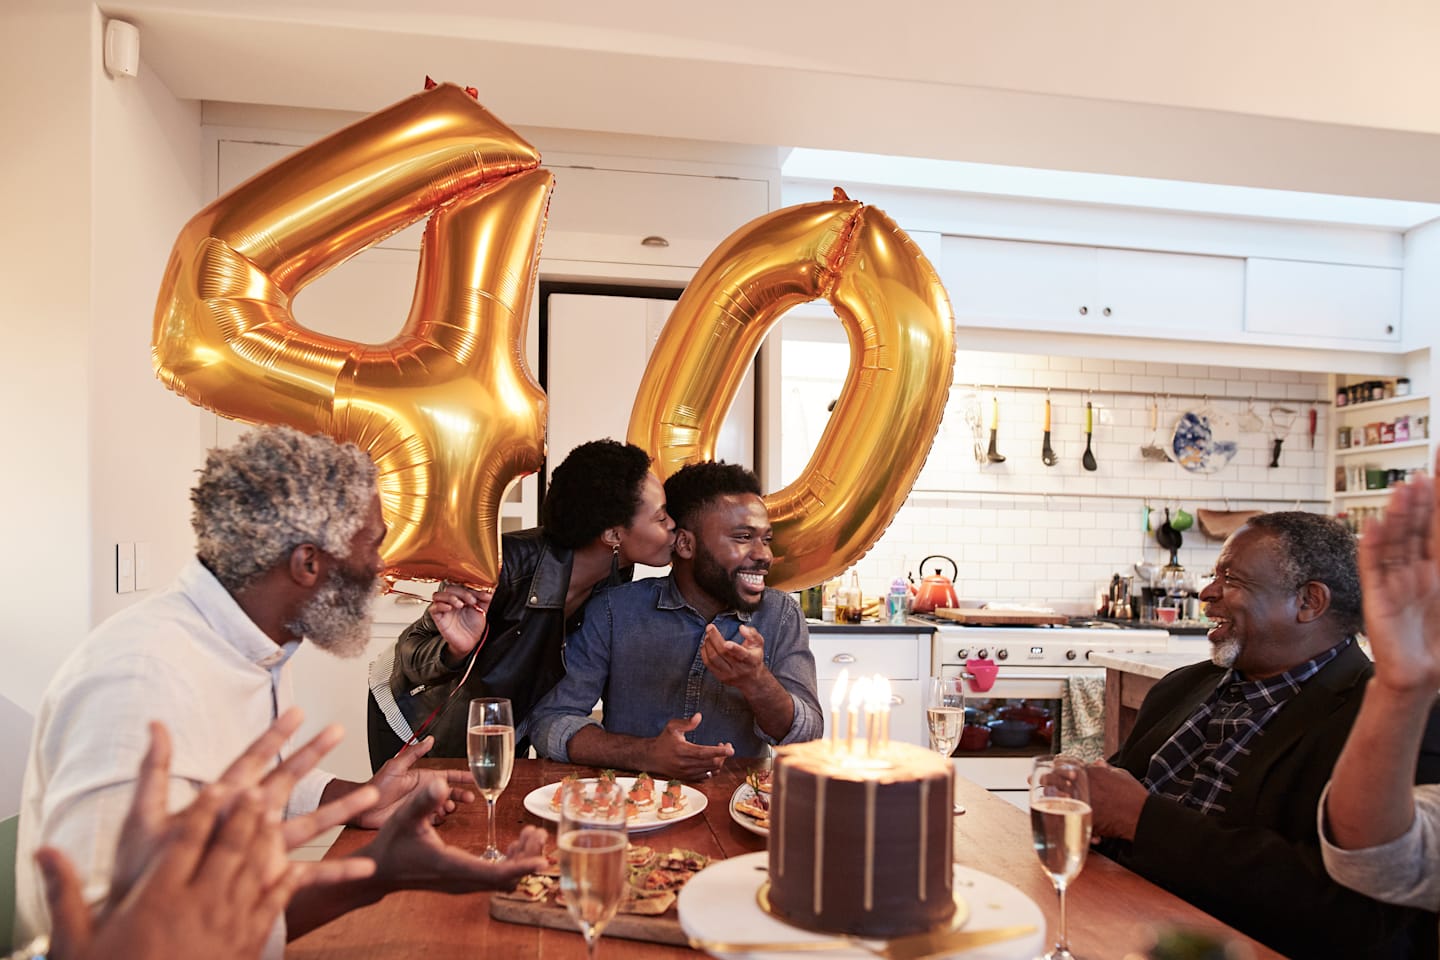 People are seated around a table celebrating a person's birthday with cake and food. Balloons in the background show a four and a zero for the birthday age of 40.